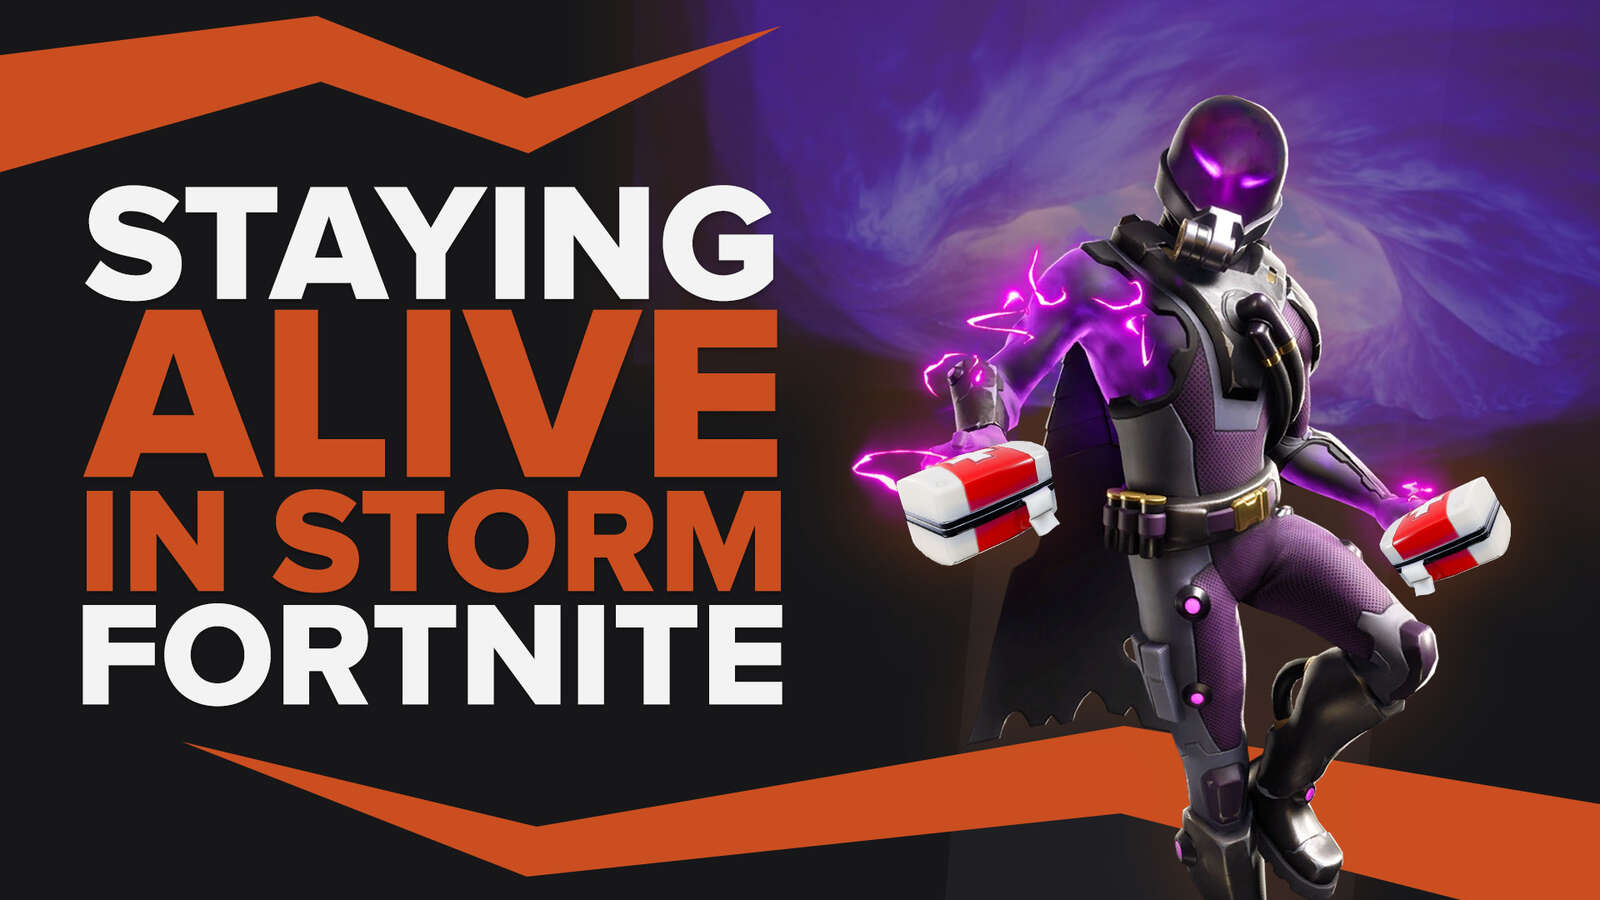 5 Tips For Staying Alive In The Storm In Fortnite